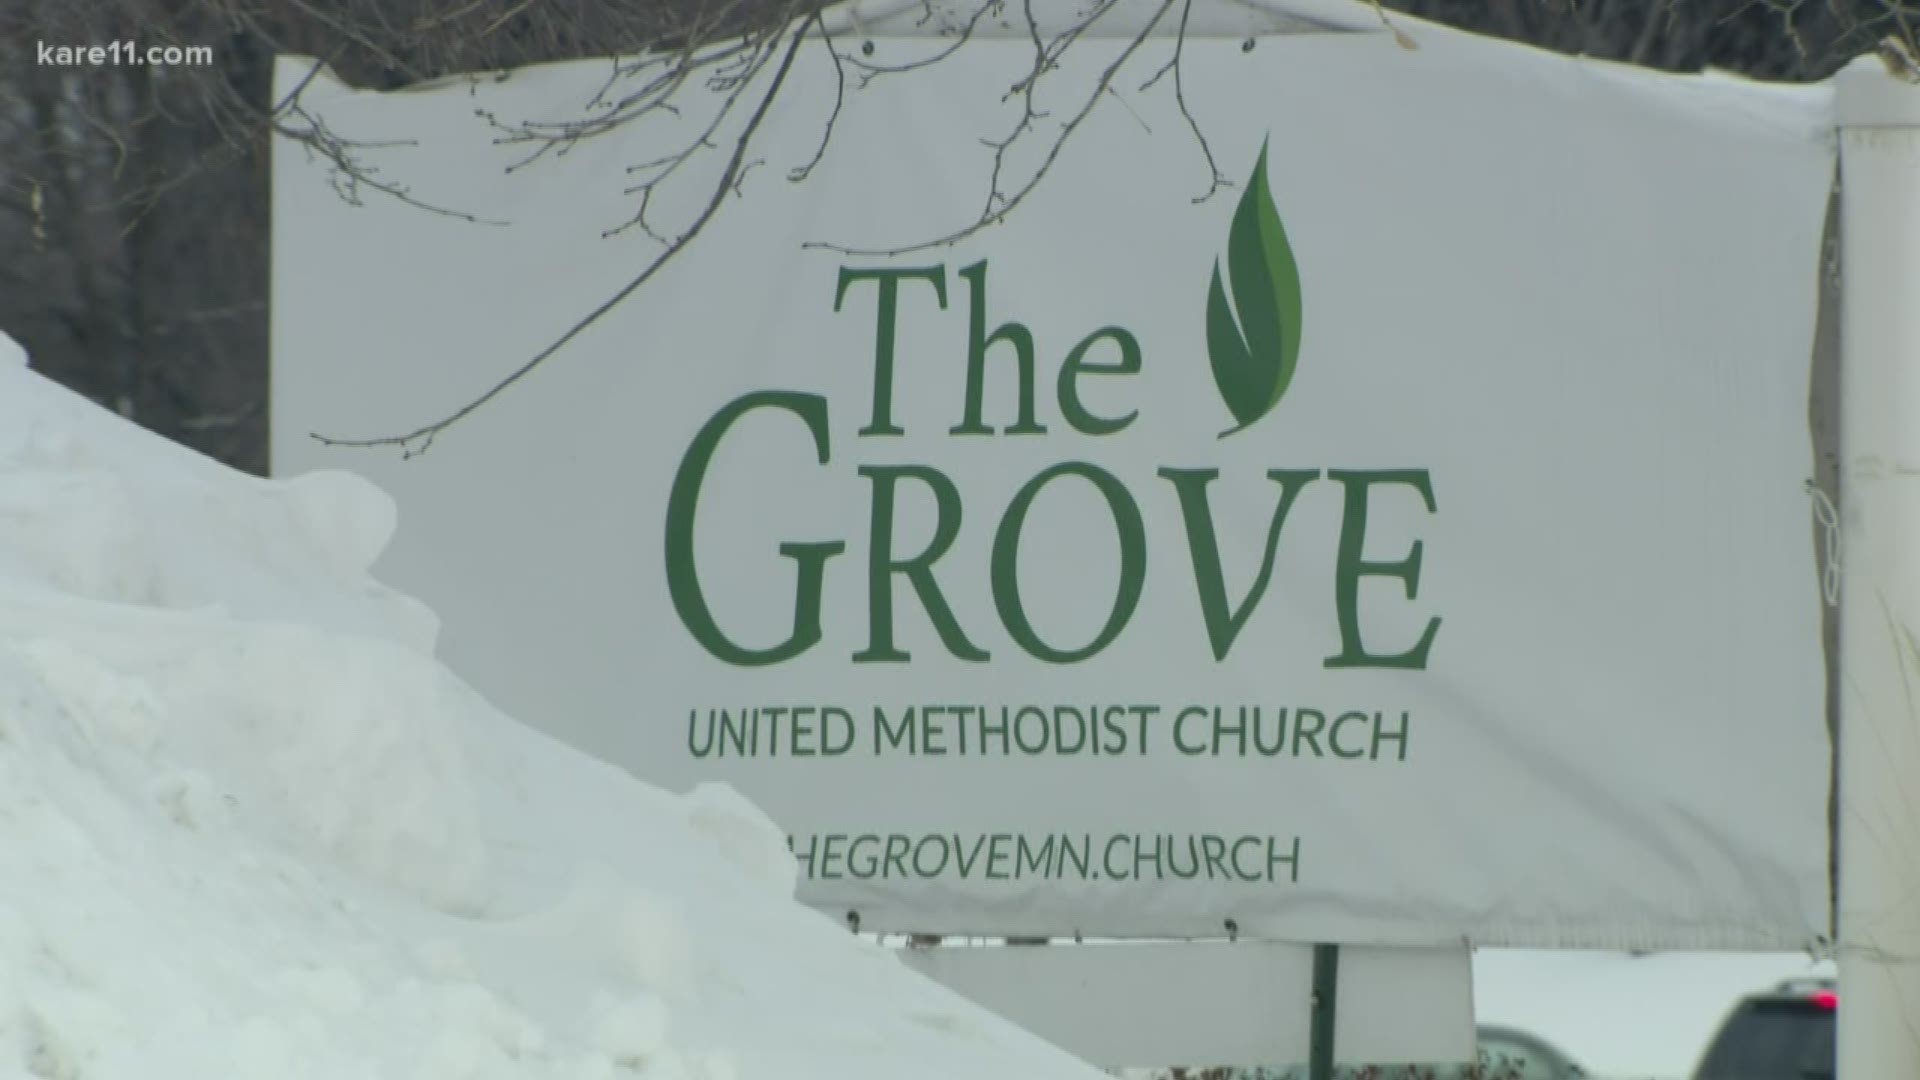 The Grove United Methodist Church says a "relaunch" is necessary to survive — but that allegations of age discrimination are not true.